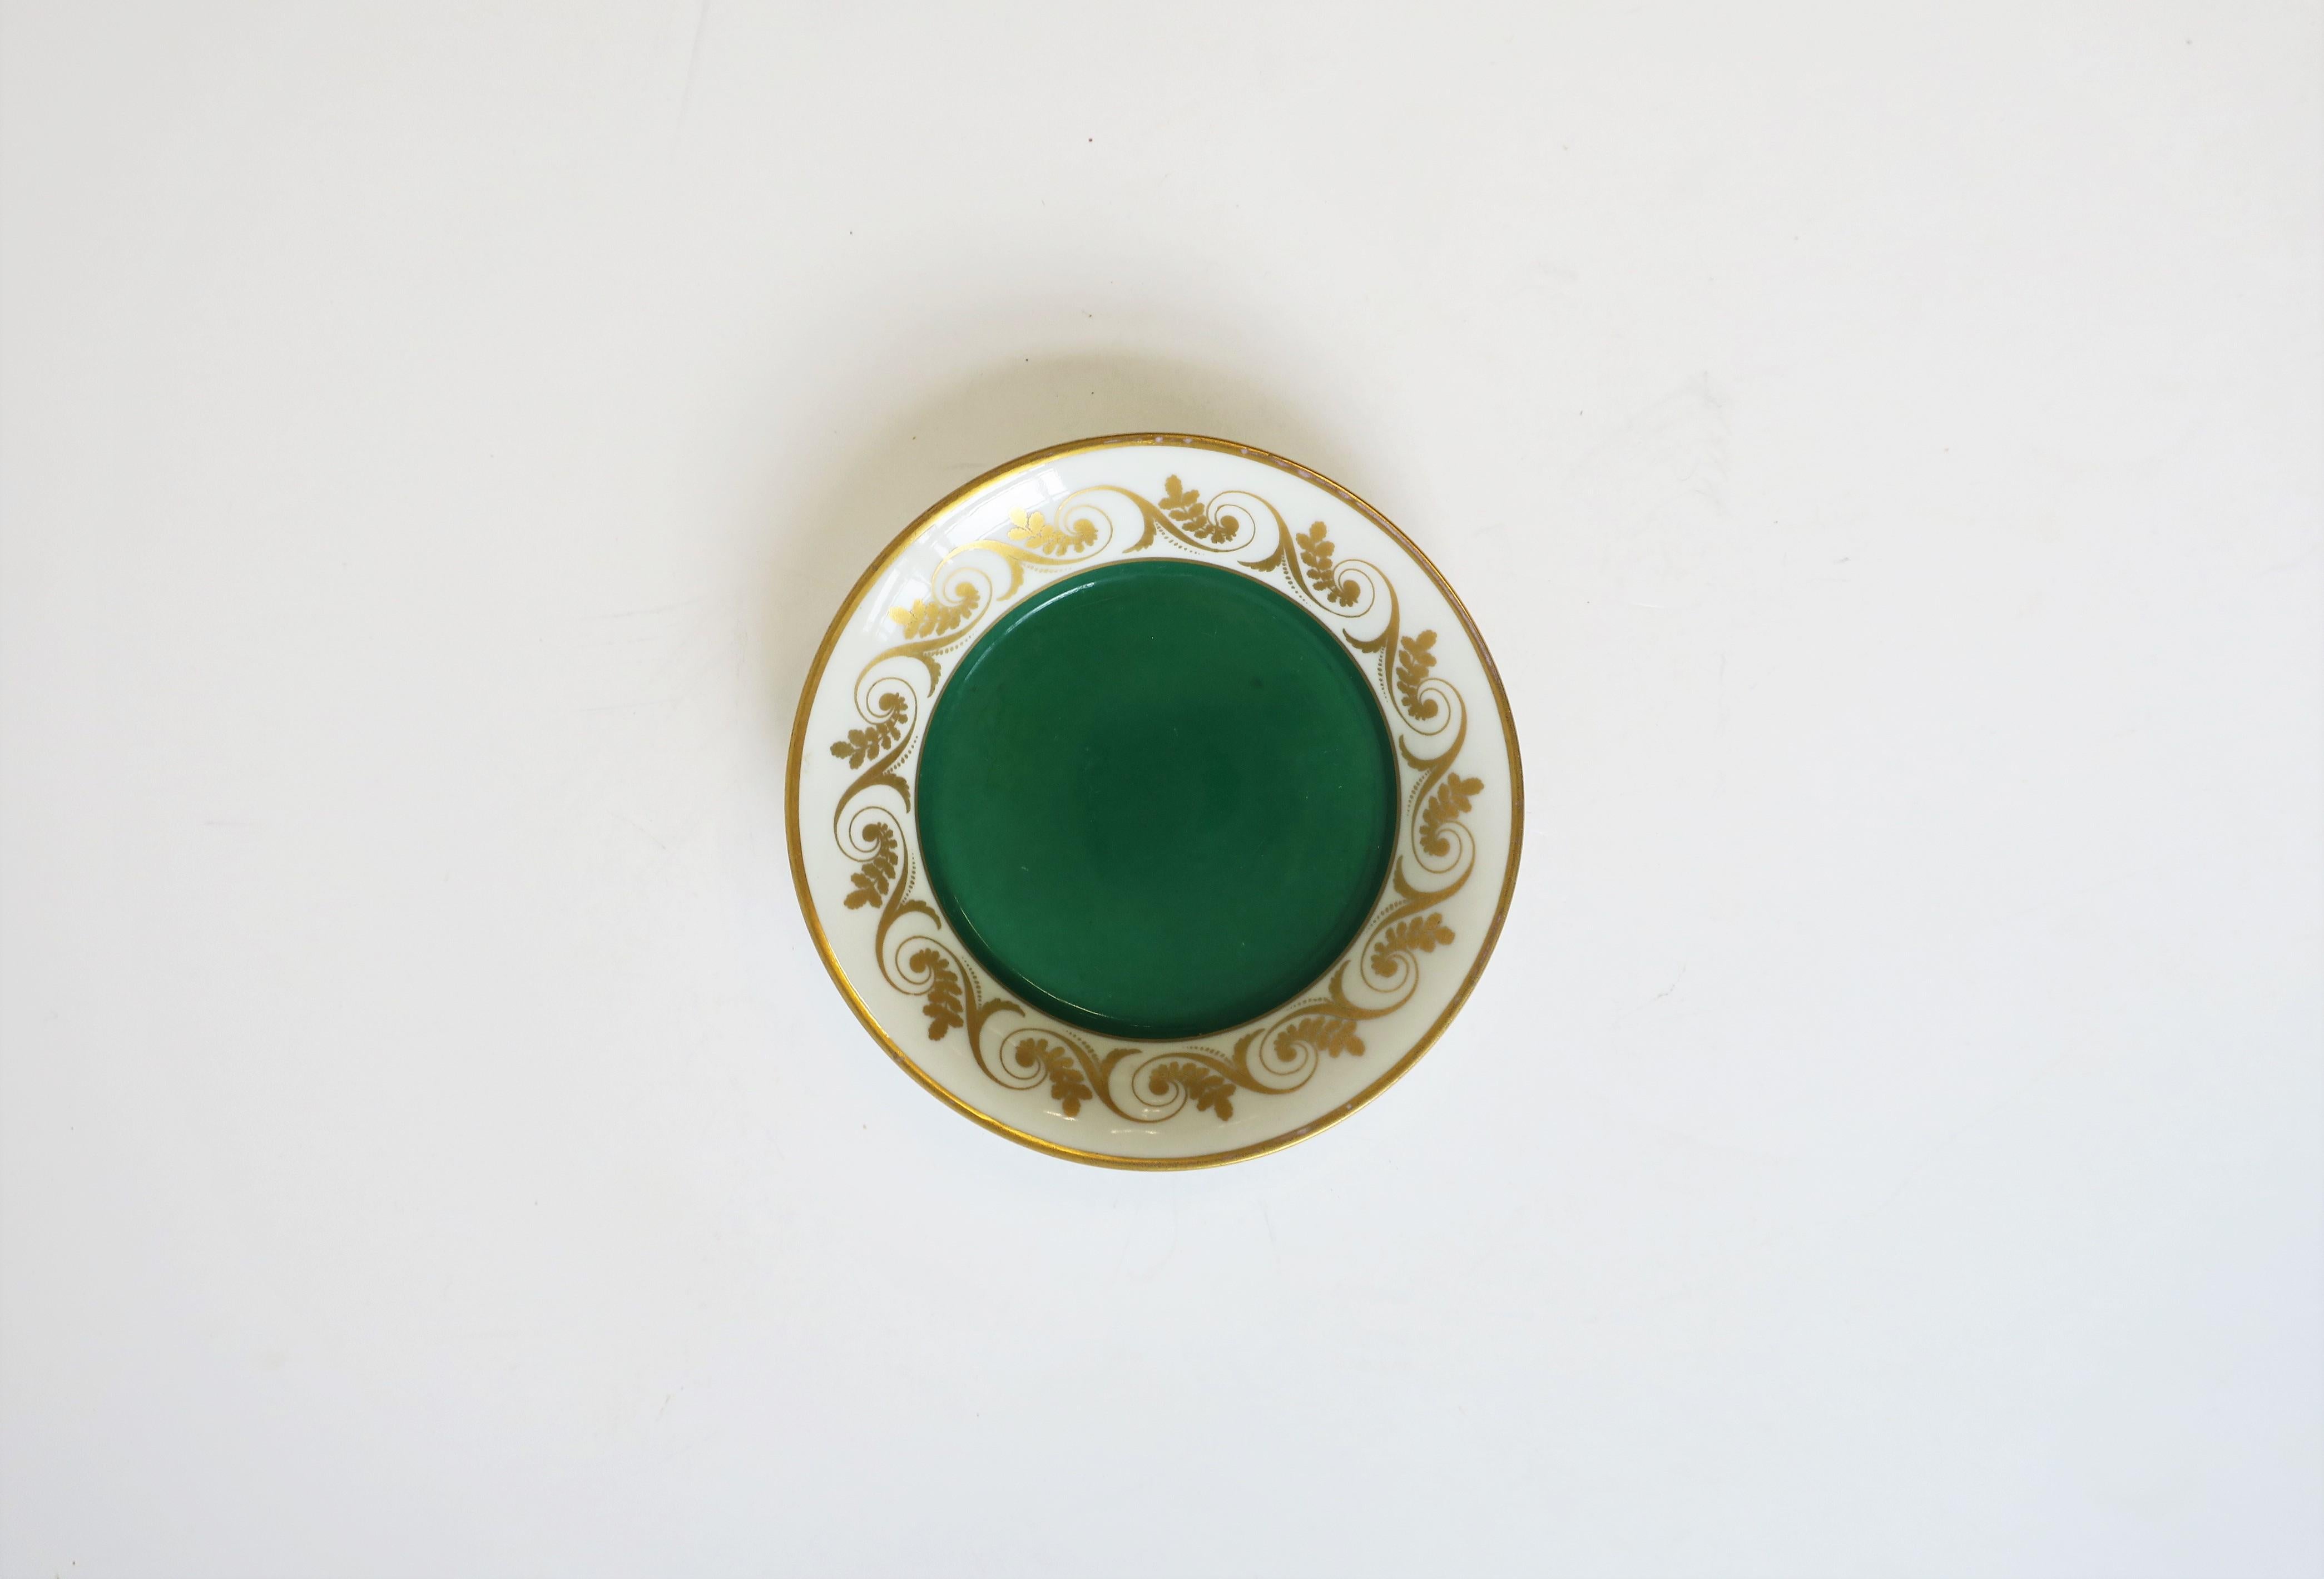 A beautiful Italian porcelain dish by designer Richard Ginori with emerald green center and gold decorative edge detail, circa Mid-20th century or earlier, Italy. Colors include green, gold, and white porcelain. With maker's mark on bottom as shown